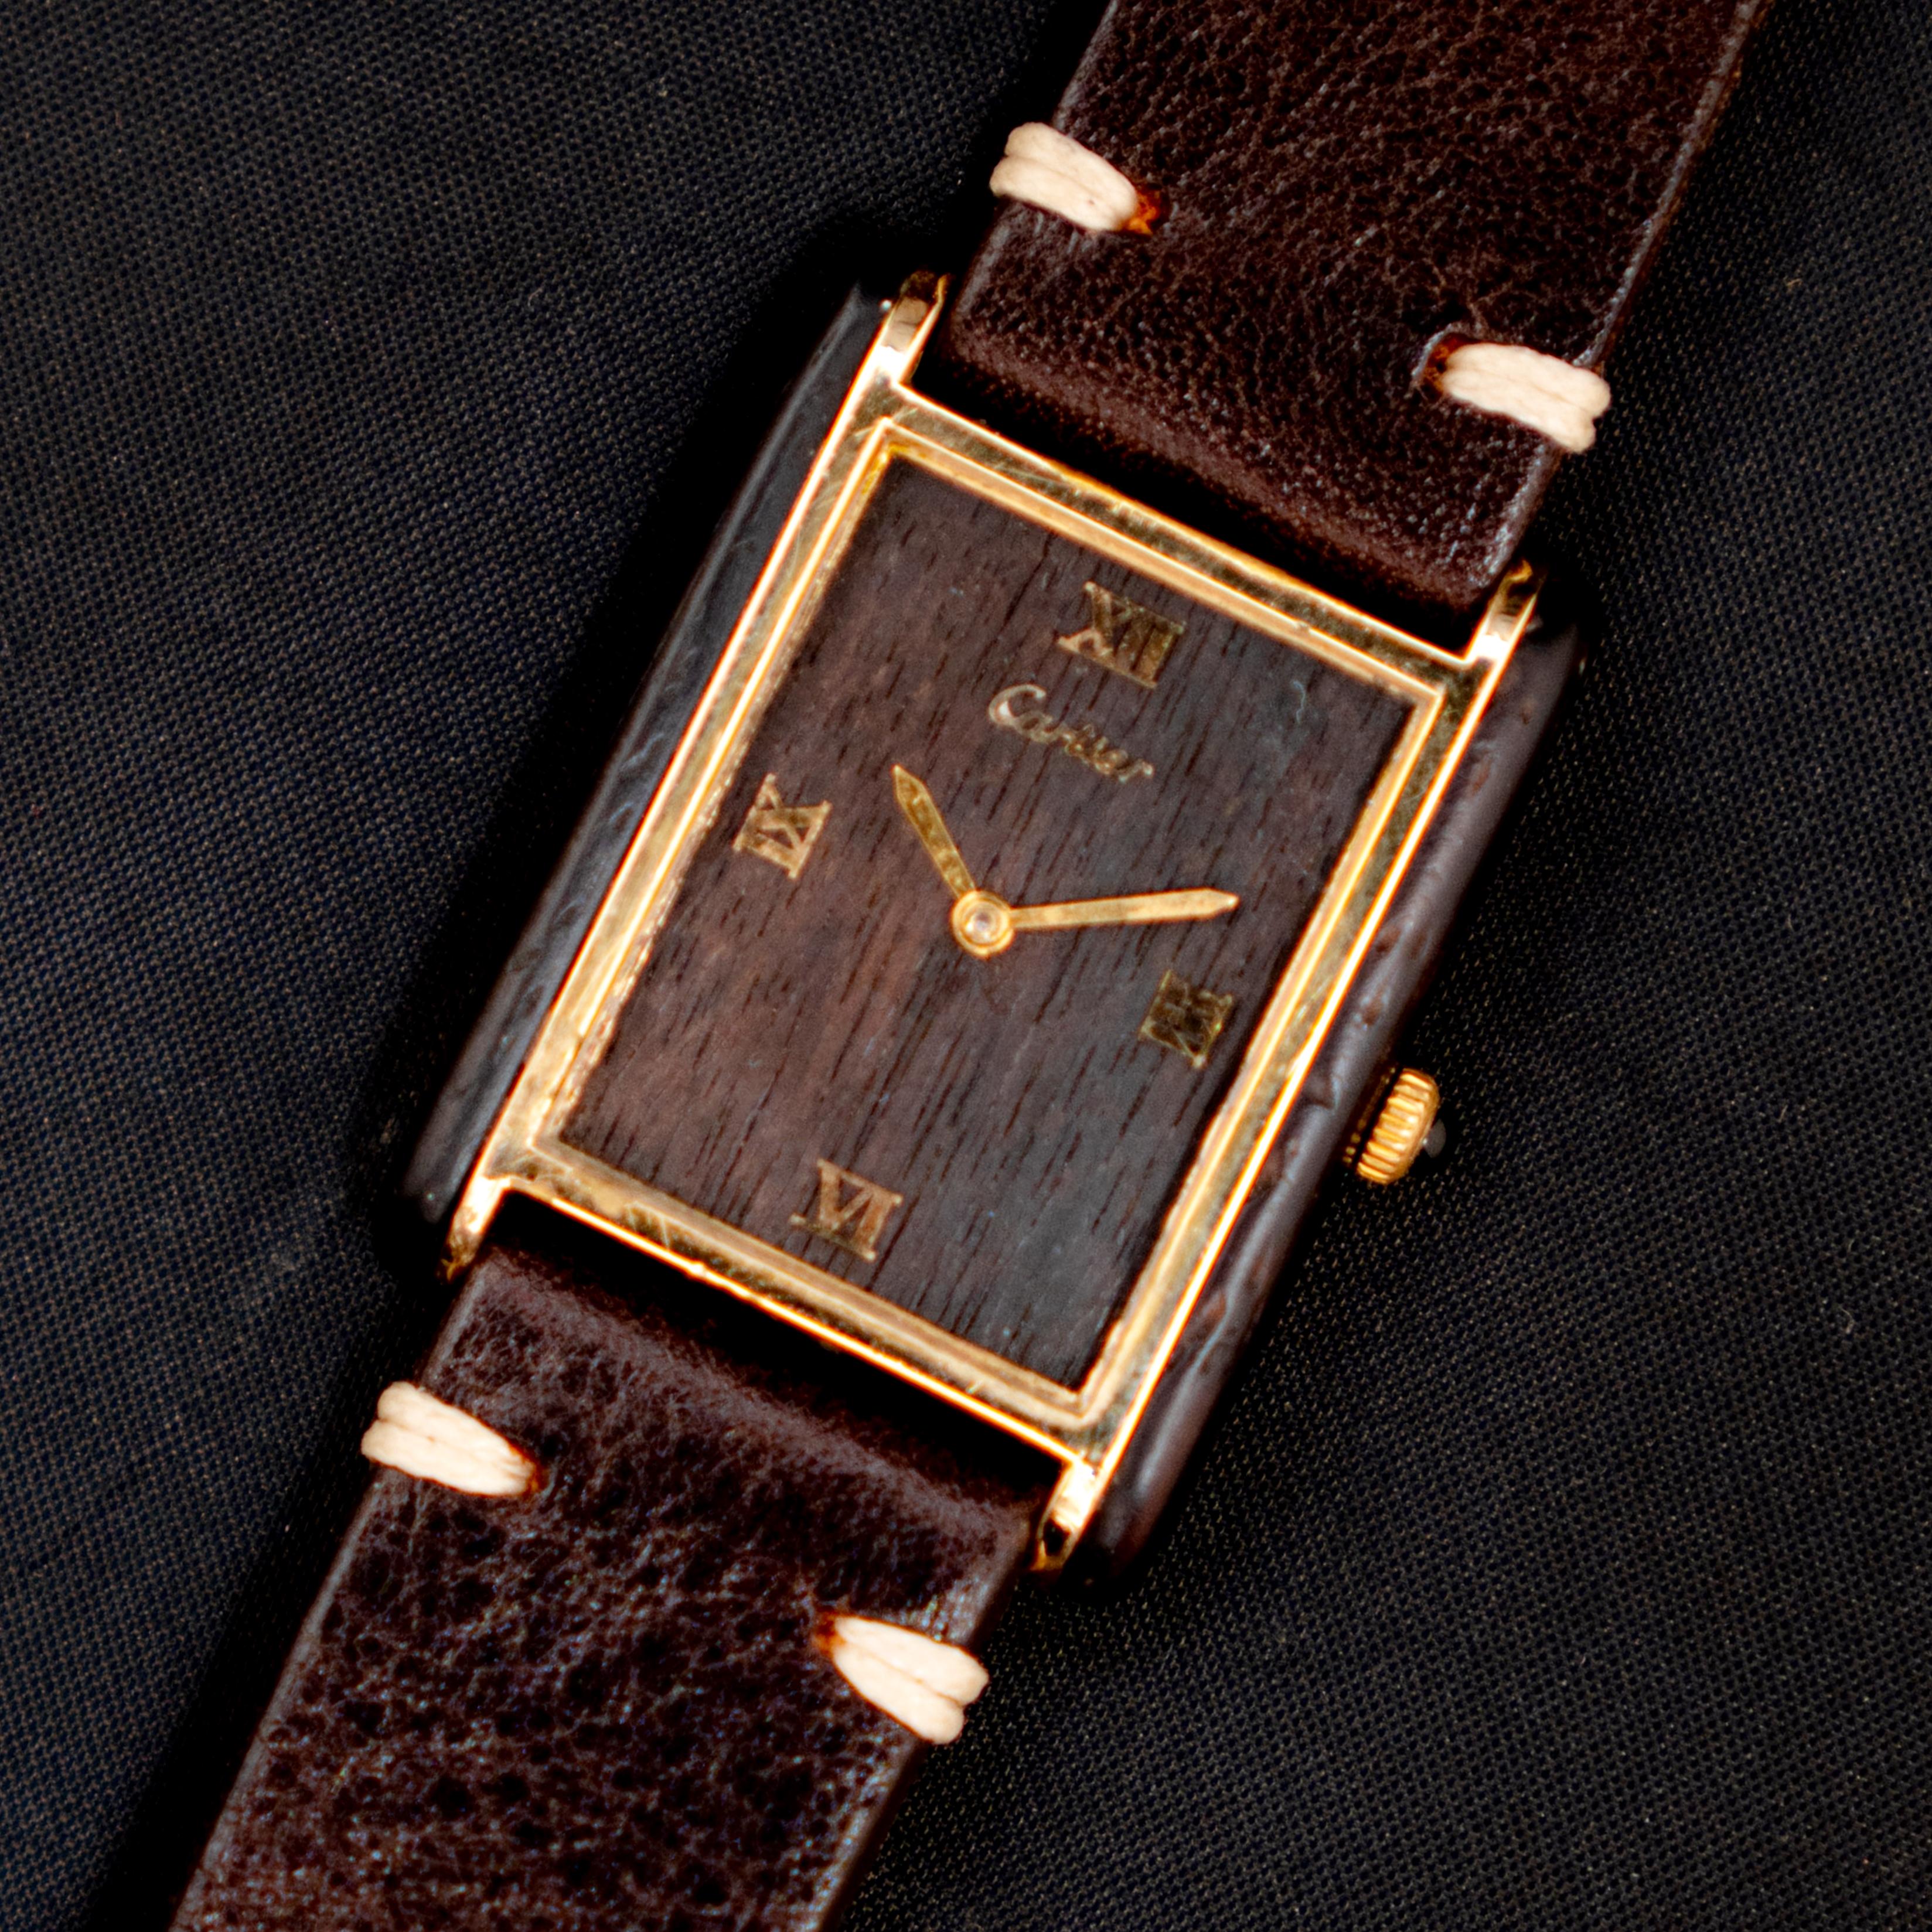 Brand: Cartier
Model: Tank
Year: 1975 – 1976
Reference: OT1894

Cartier introduced the Must De Cartier Tank timepieces during the mid-1970s, these watches were meticulously crafted using a rare Brazilian rosewood known as Palissandre De Rio,